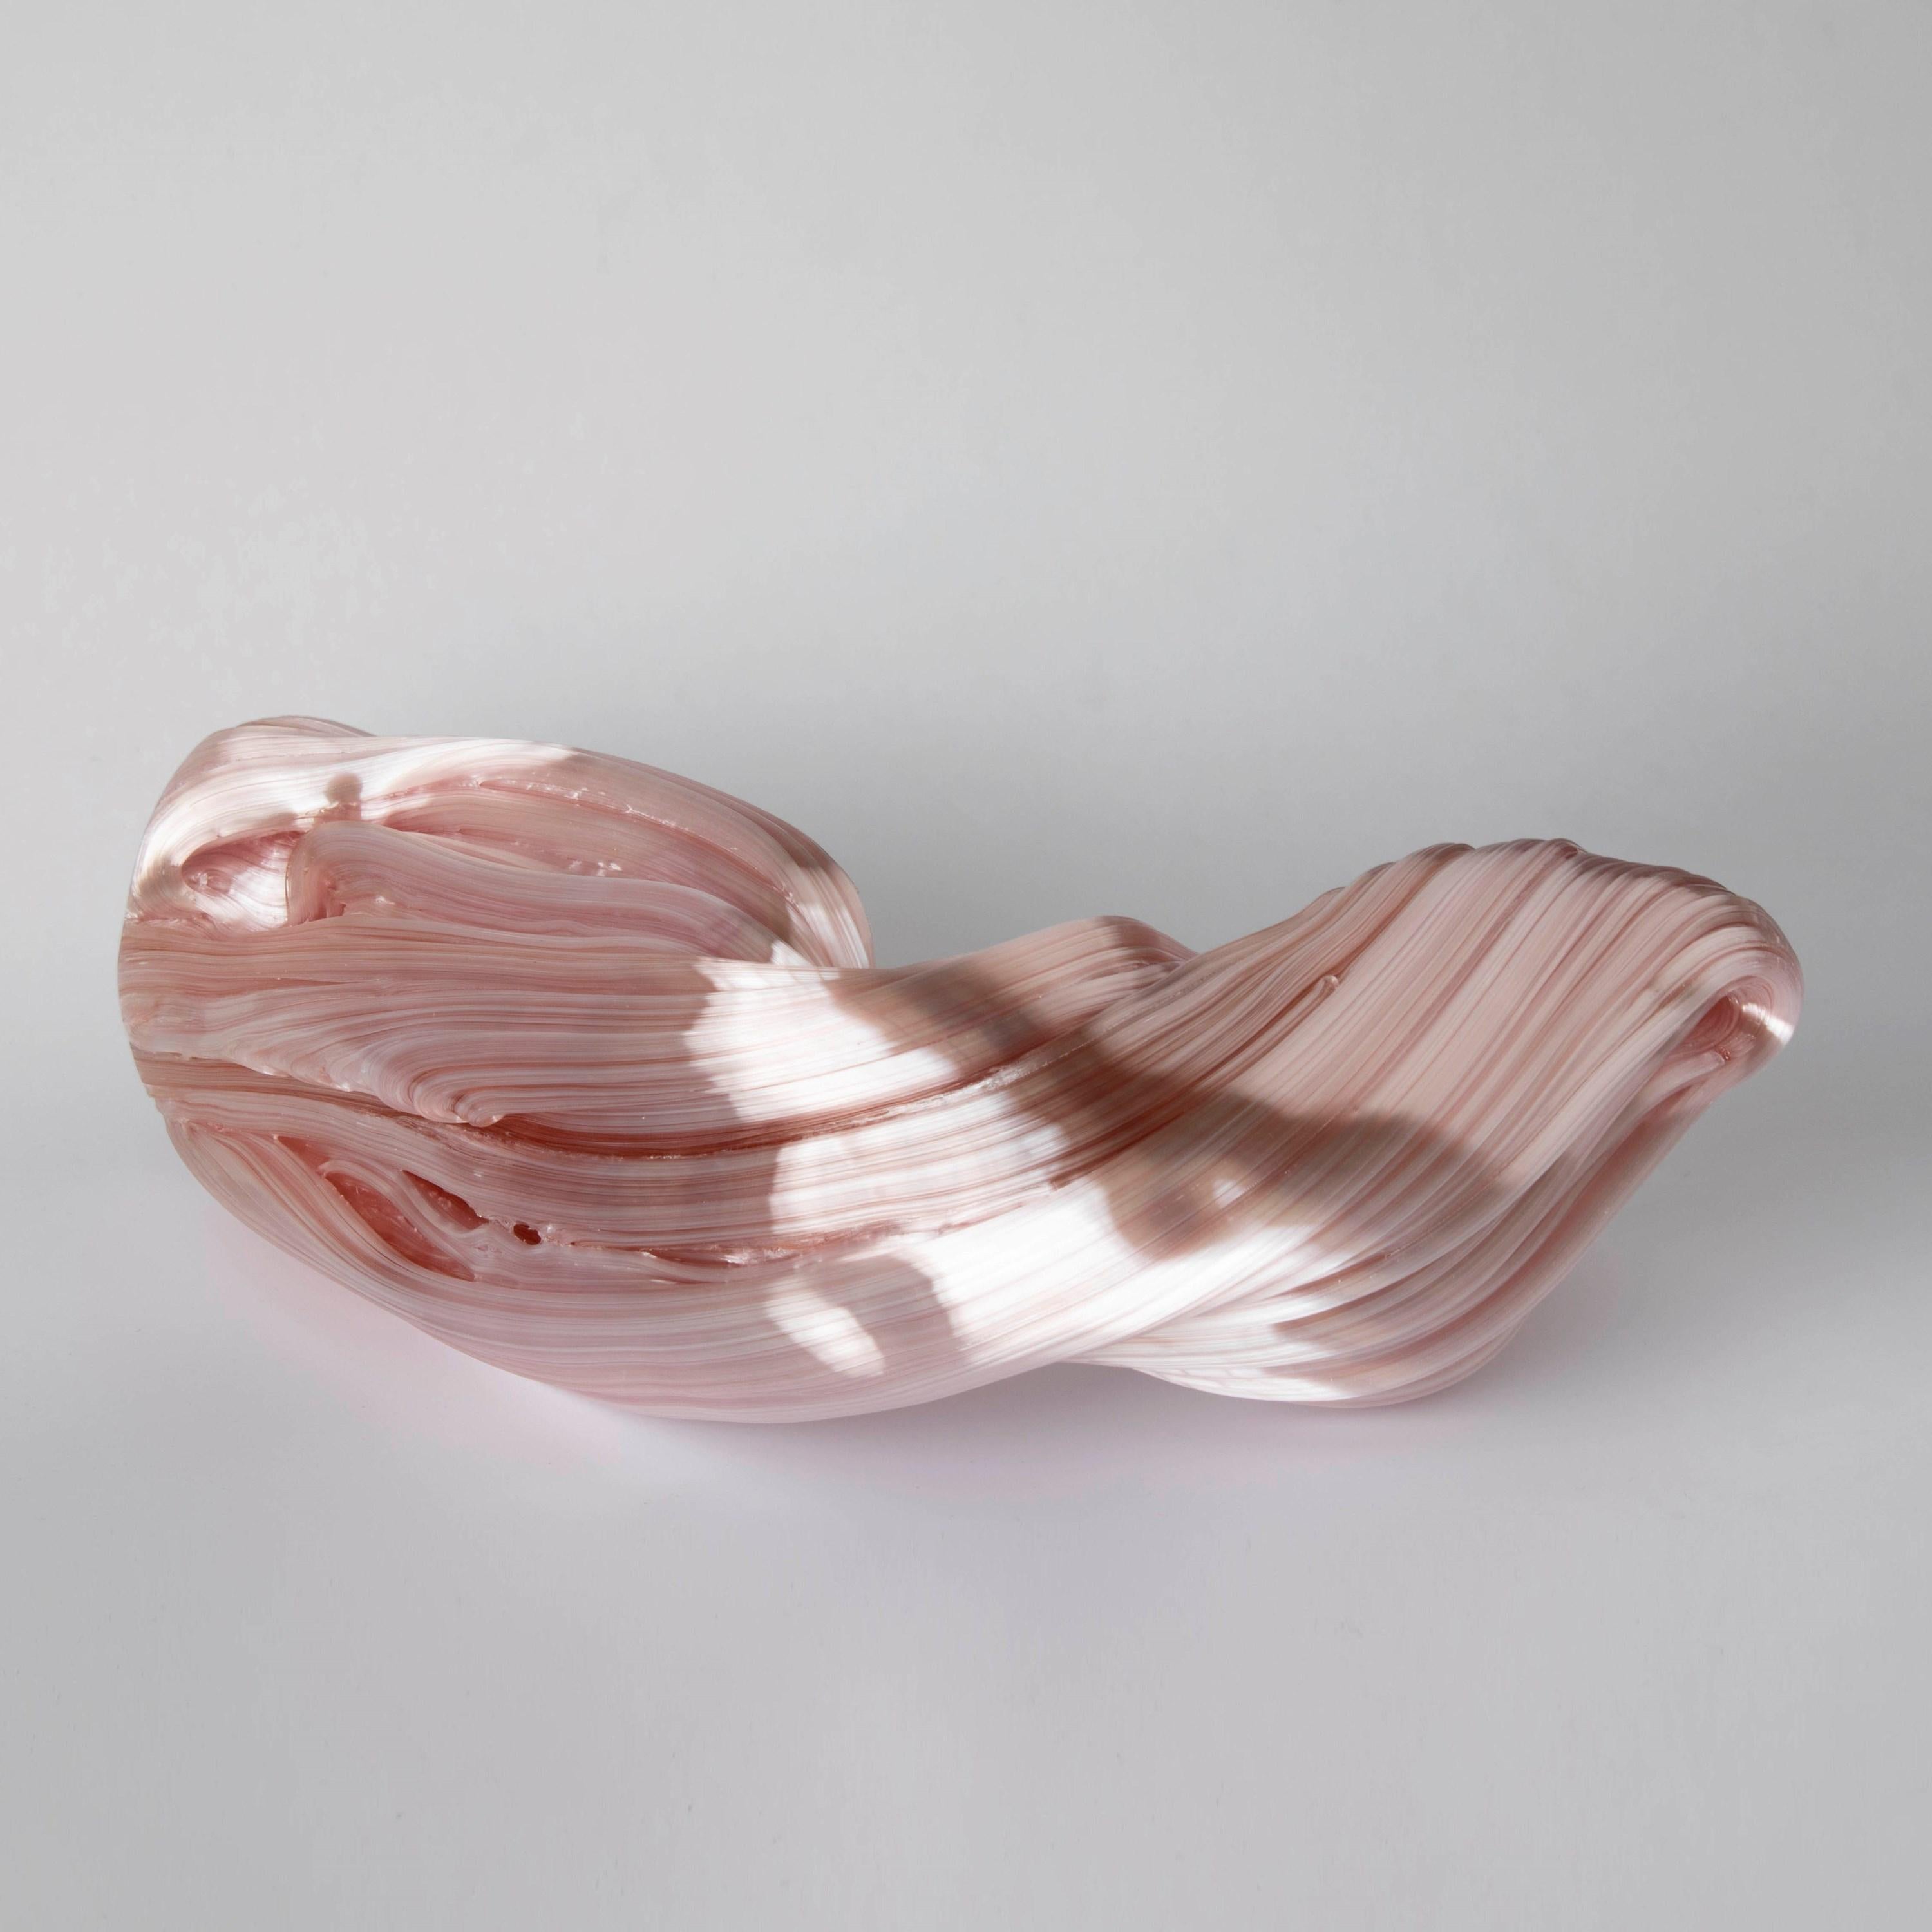 Organic Modern Curve in Coral, a Unique coral pink Glass Sculpture by Maria Bang Espersen